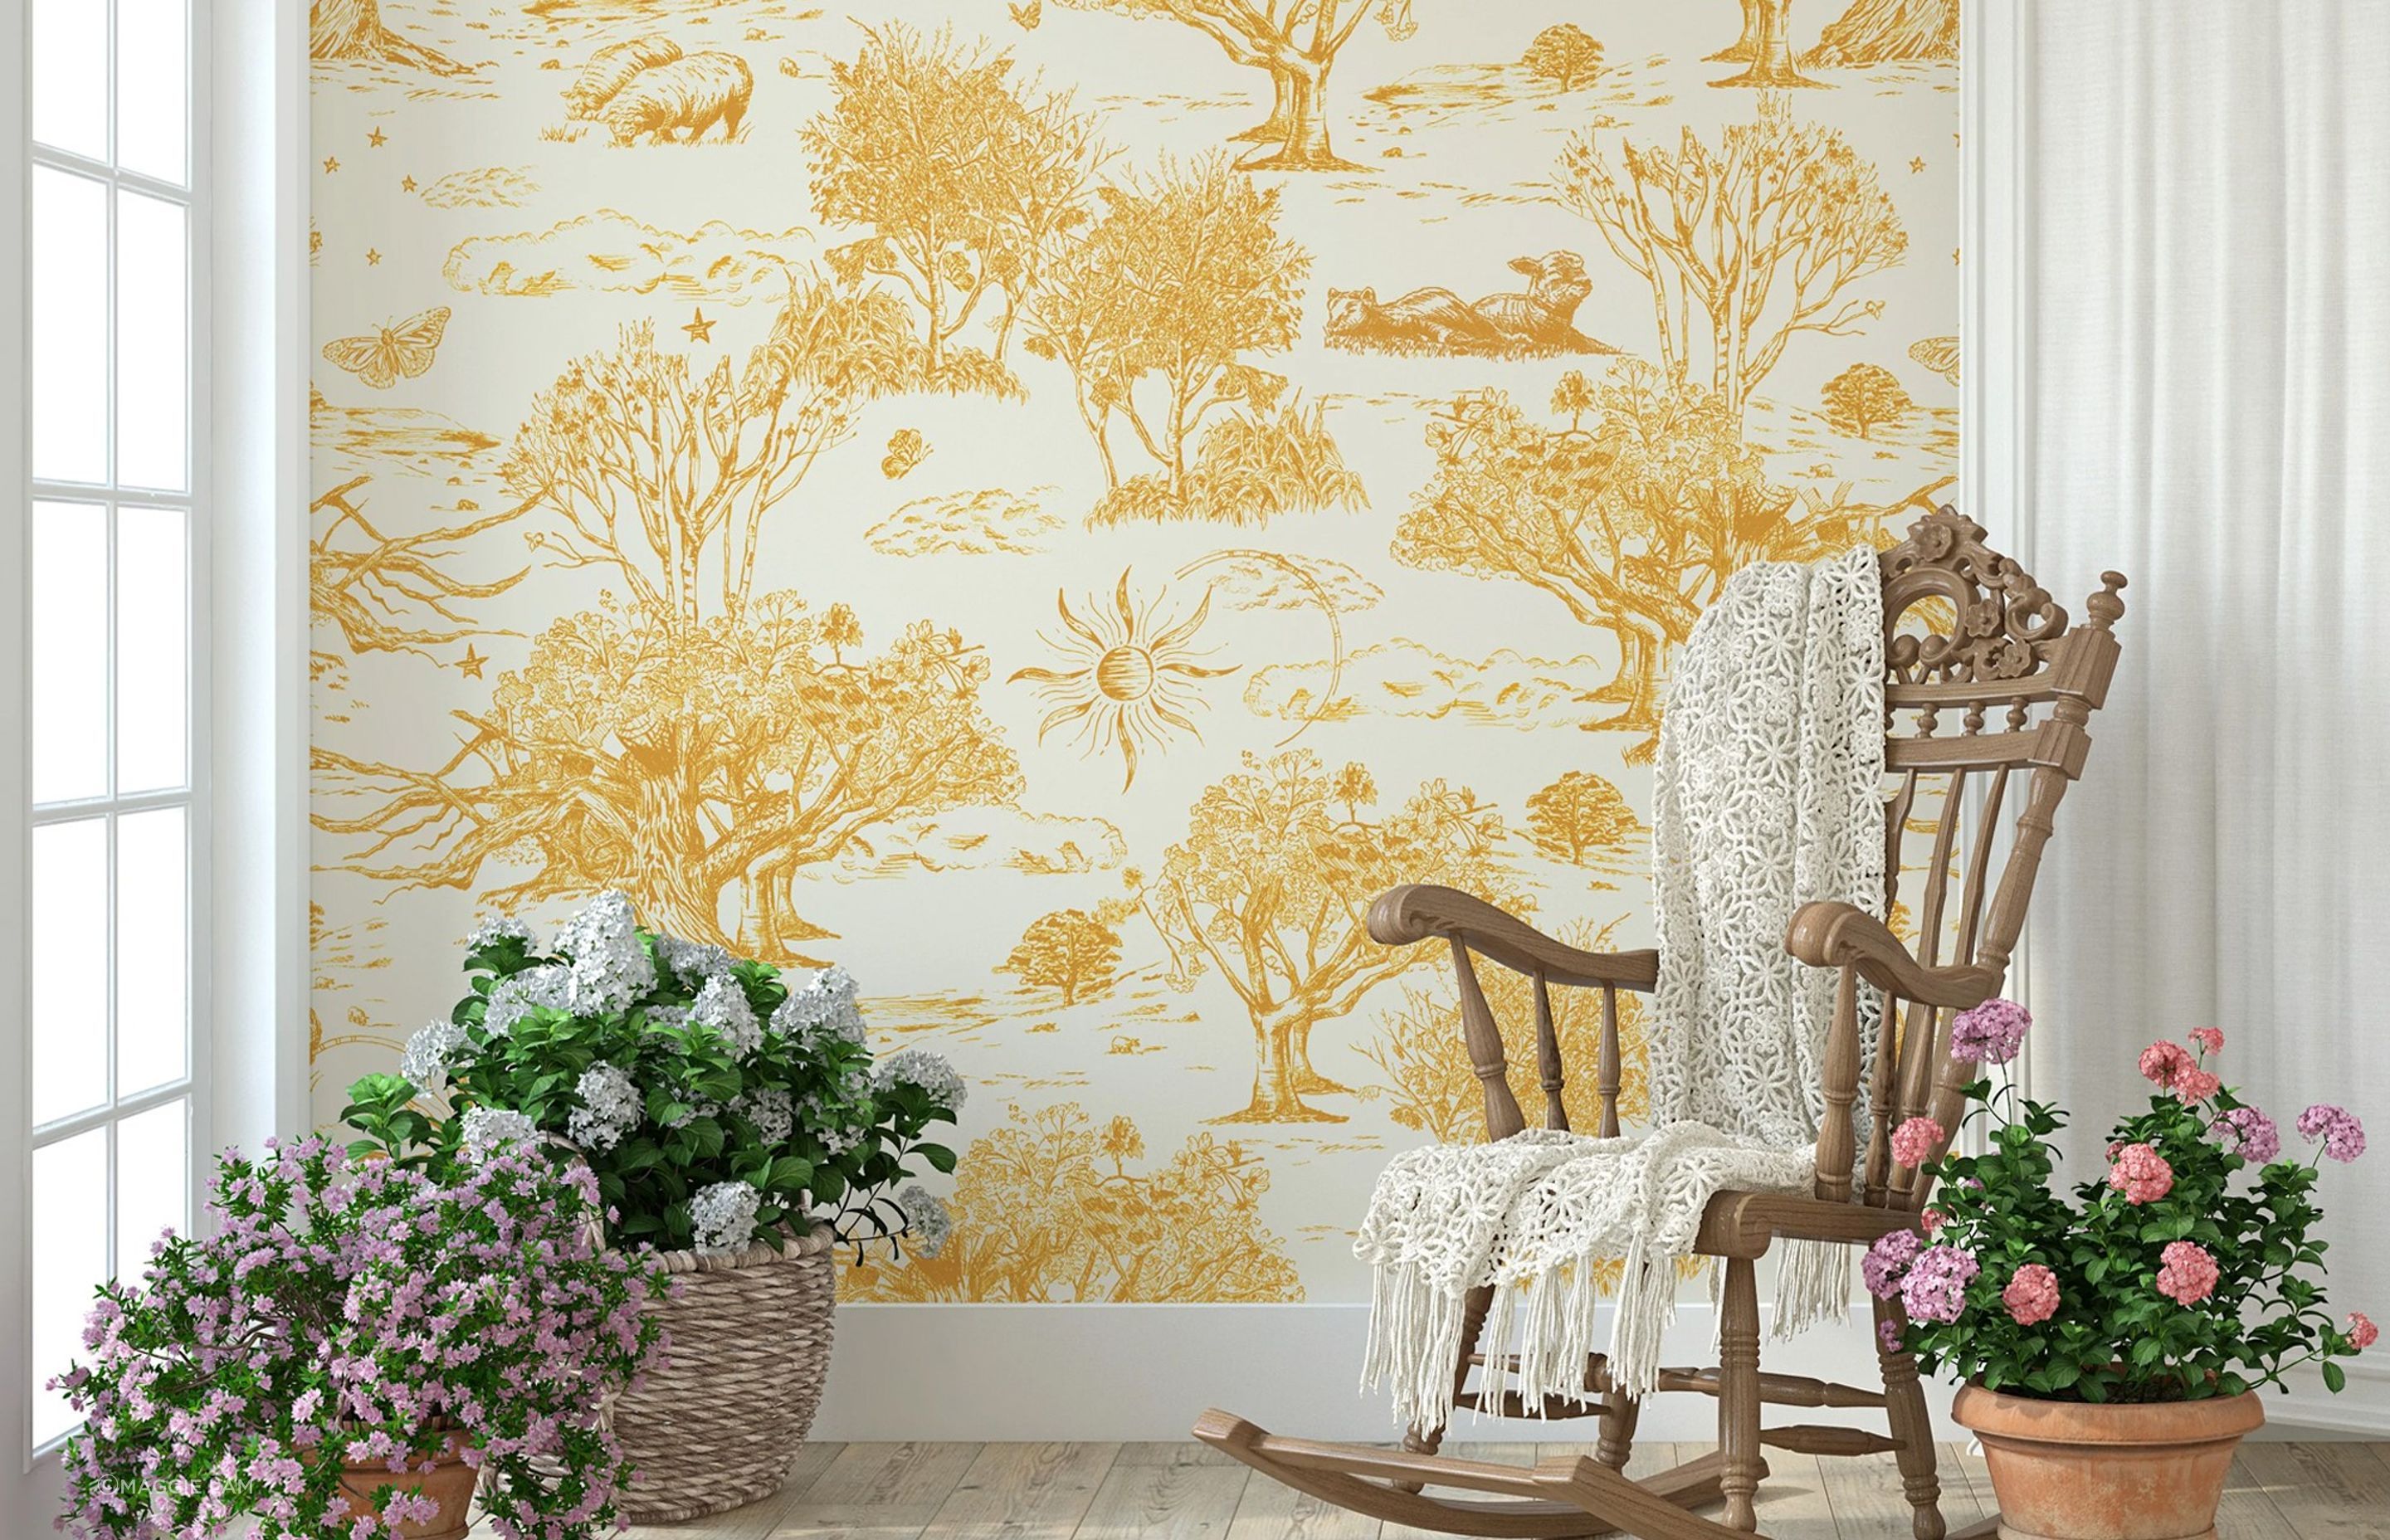 Kowhai, Manuka and spring lambs — iconic motifs of New Zealand captured in the delightful Blue Wonder in Golden Glow.